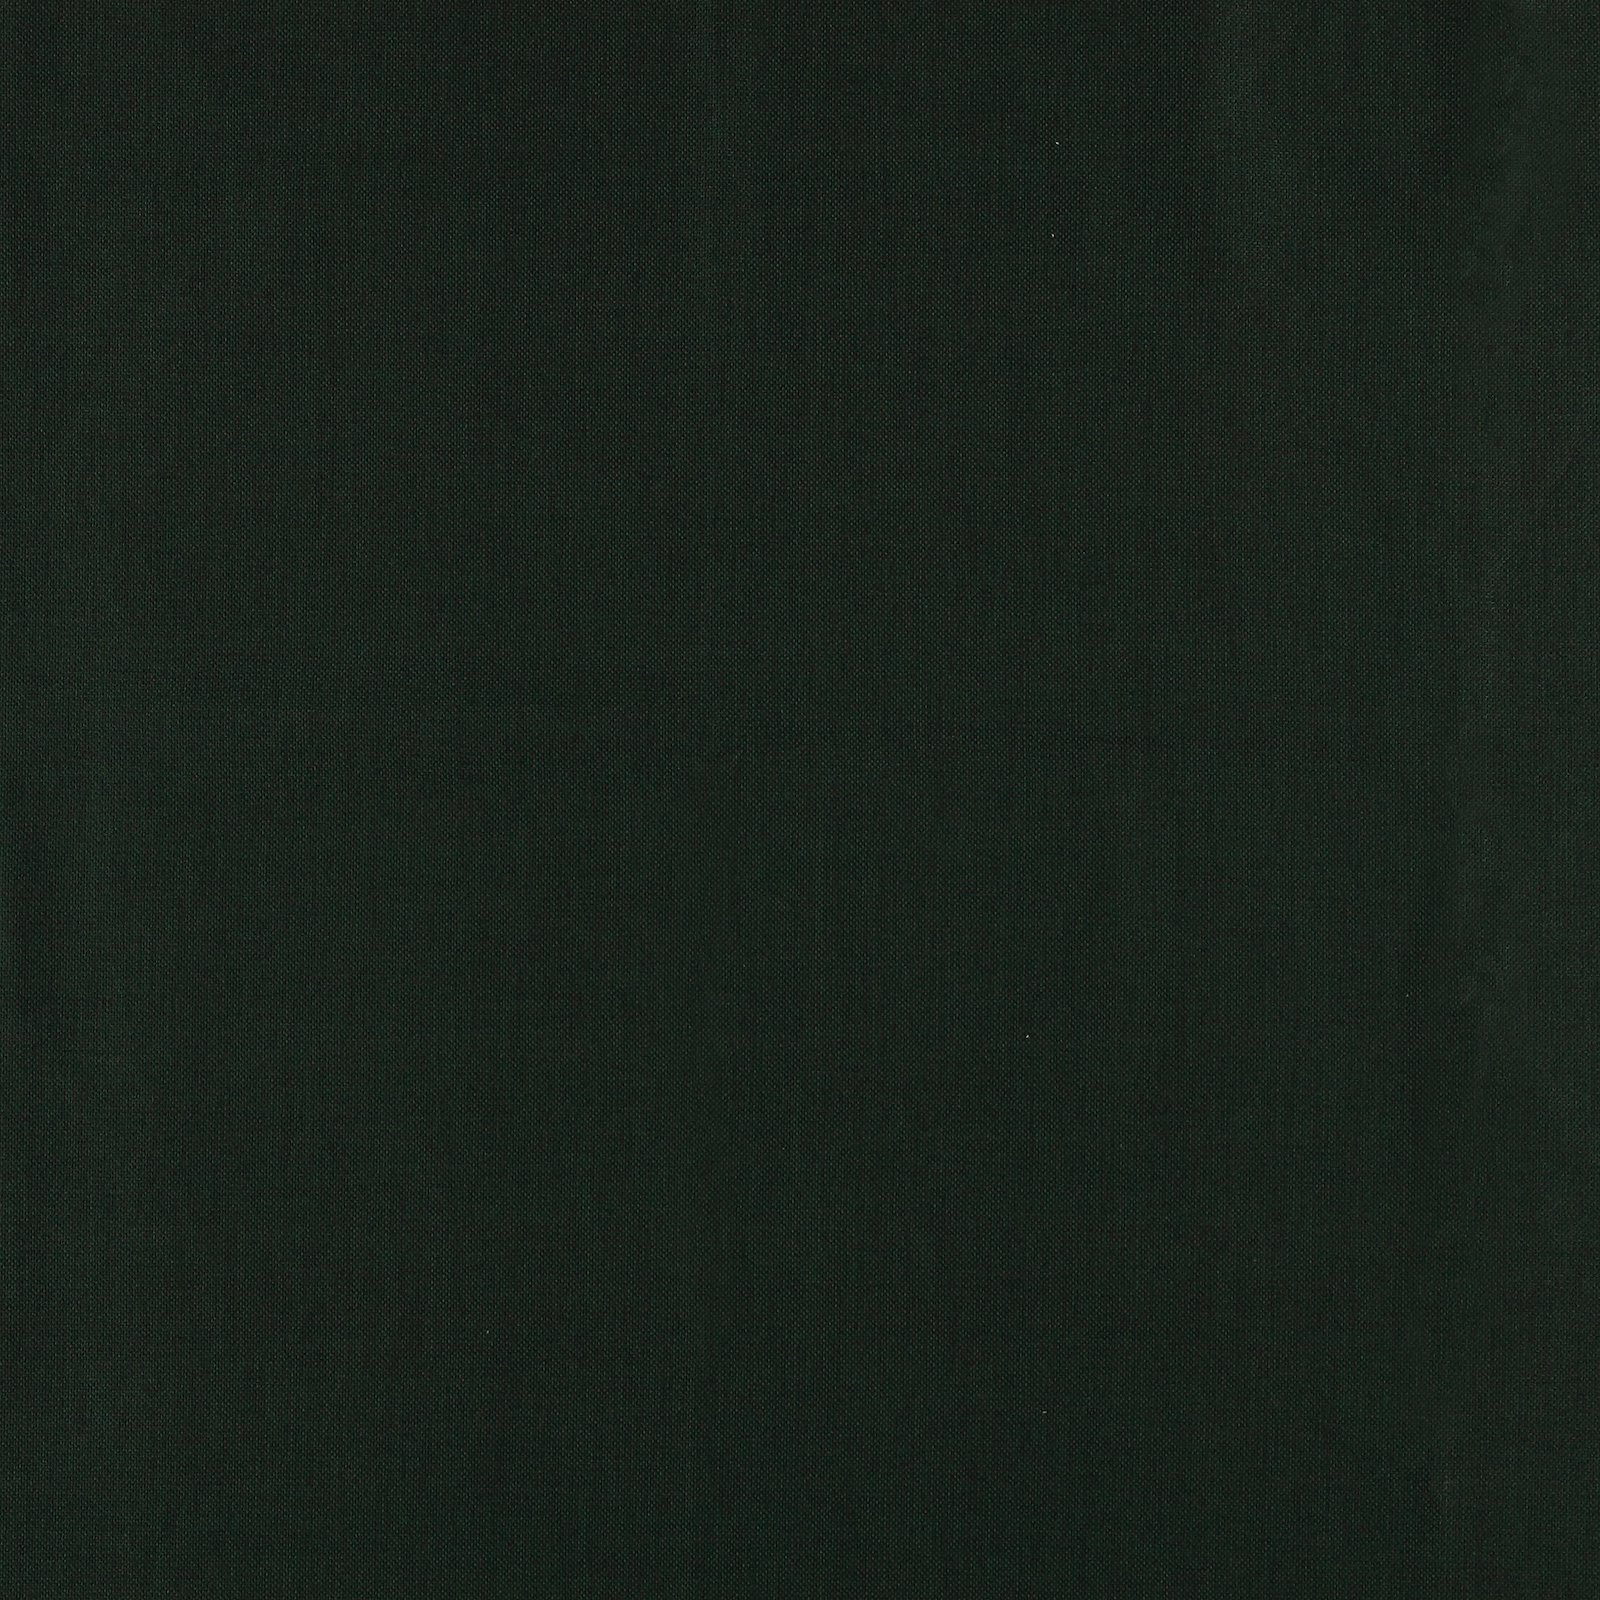 Upholstery fabric emerald green 823696_pack_sp